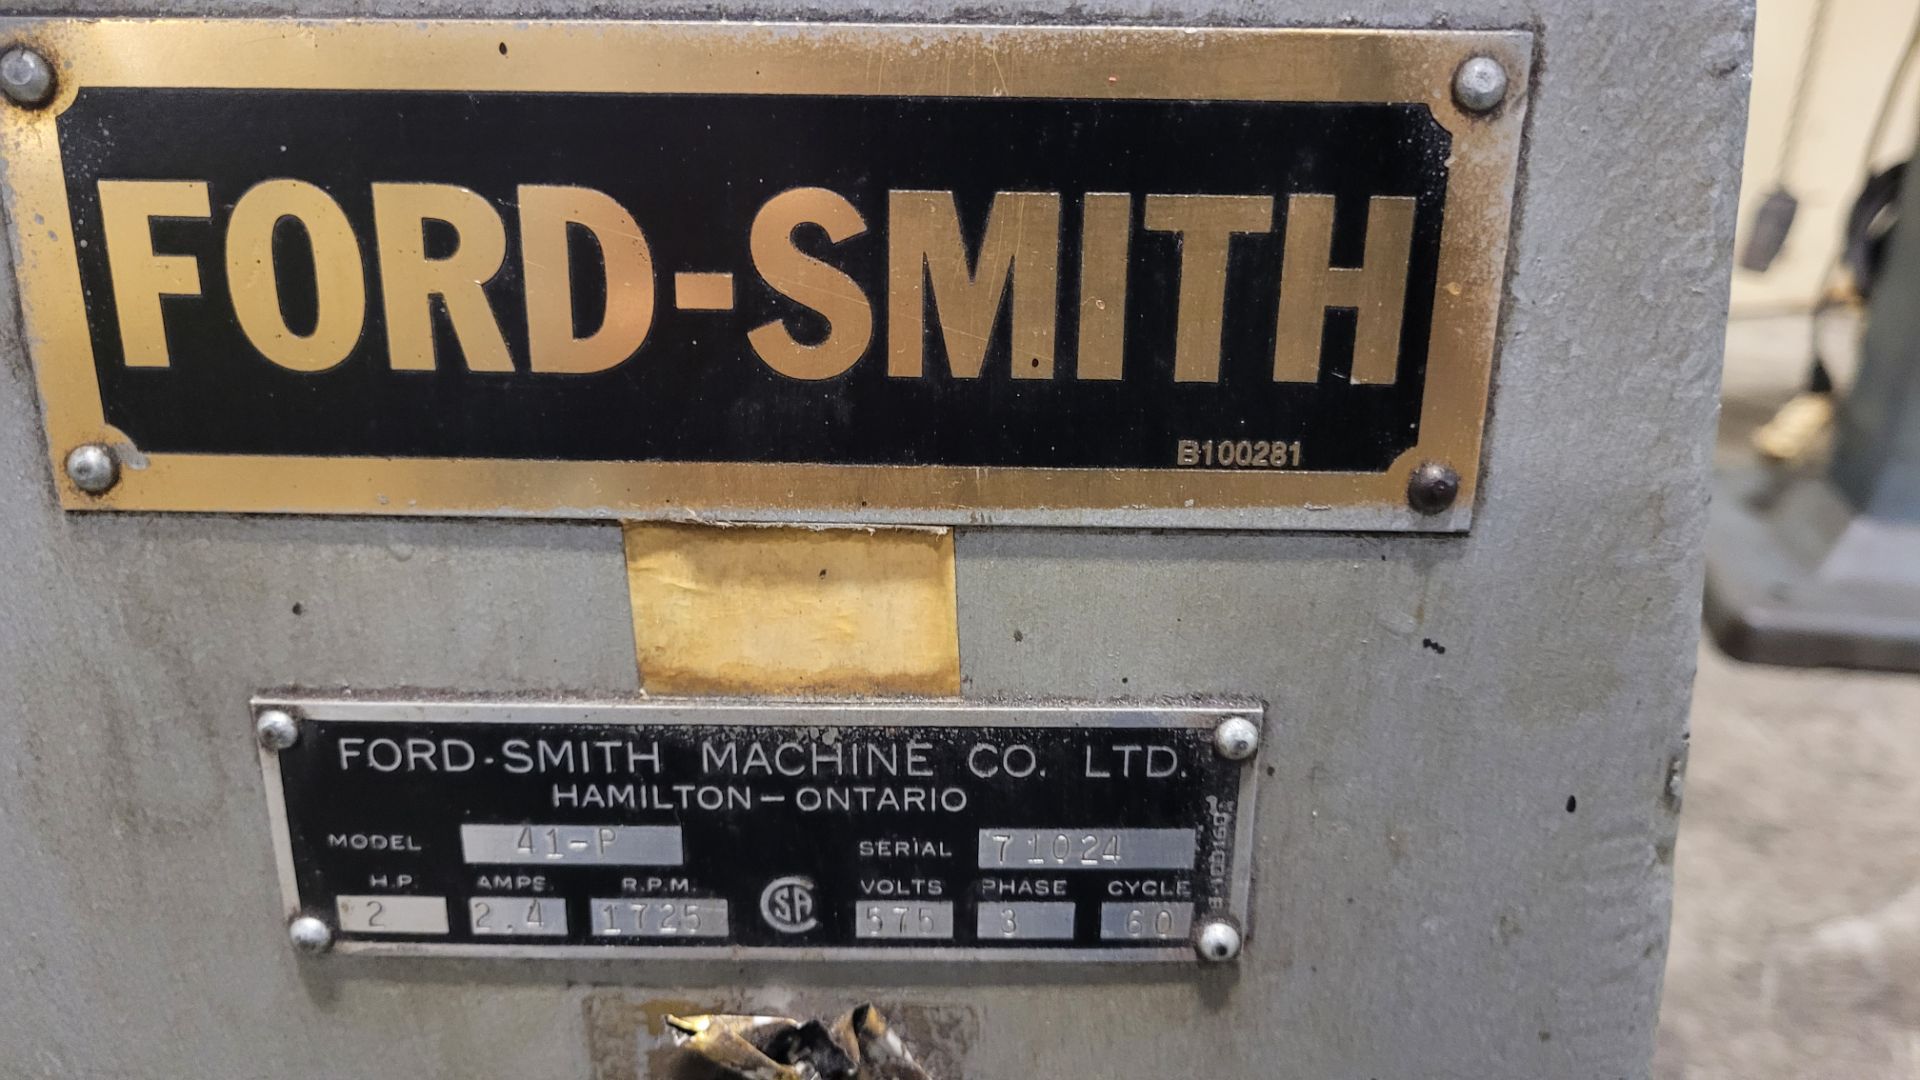 FORD-SMITH 41-P DUAL PEDESTAL GRINDER (RIGGING FEE $45) - Image 2 of 3